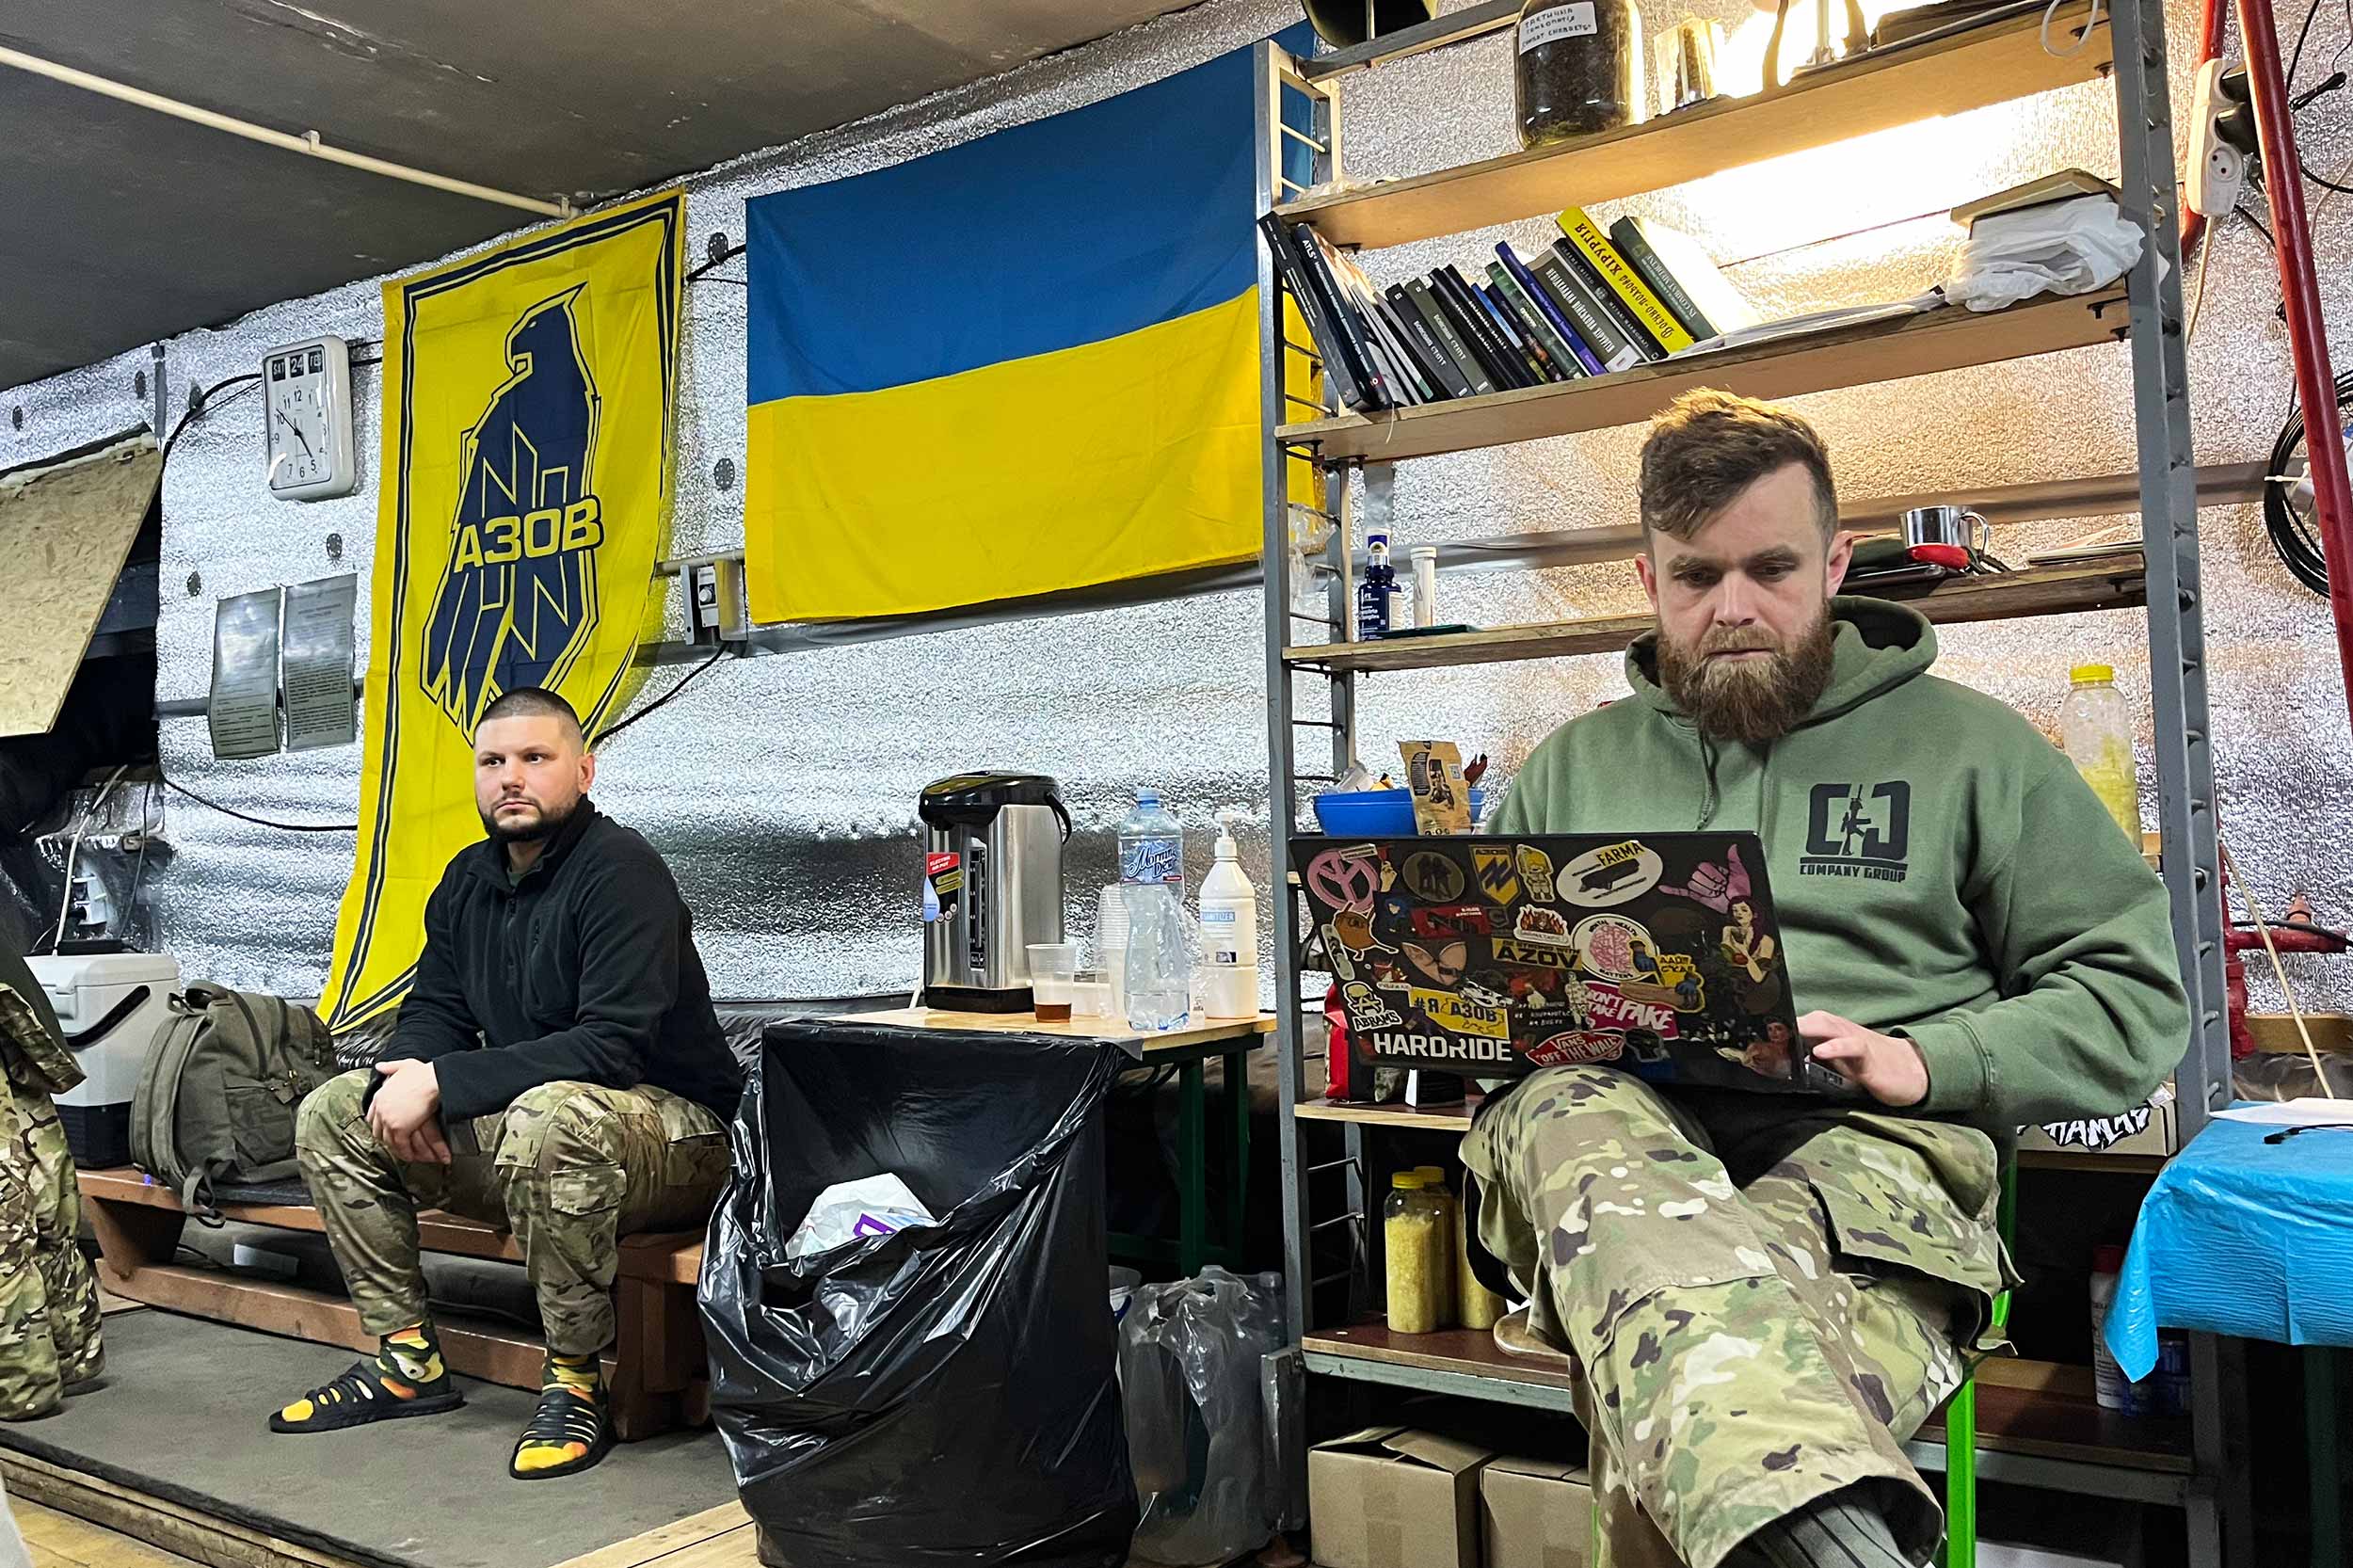 A medical corps with the Azov Brigade in Lyman, eastern Ukraine, wait to treat wounded soldiers, often suffering from shelling wounds in the frontline trenches. © Anthony Borden